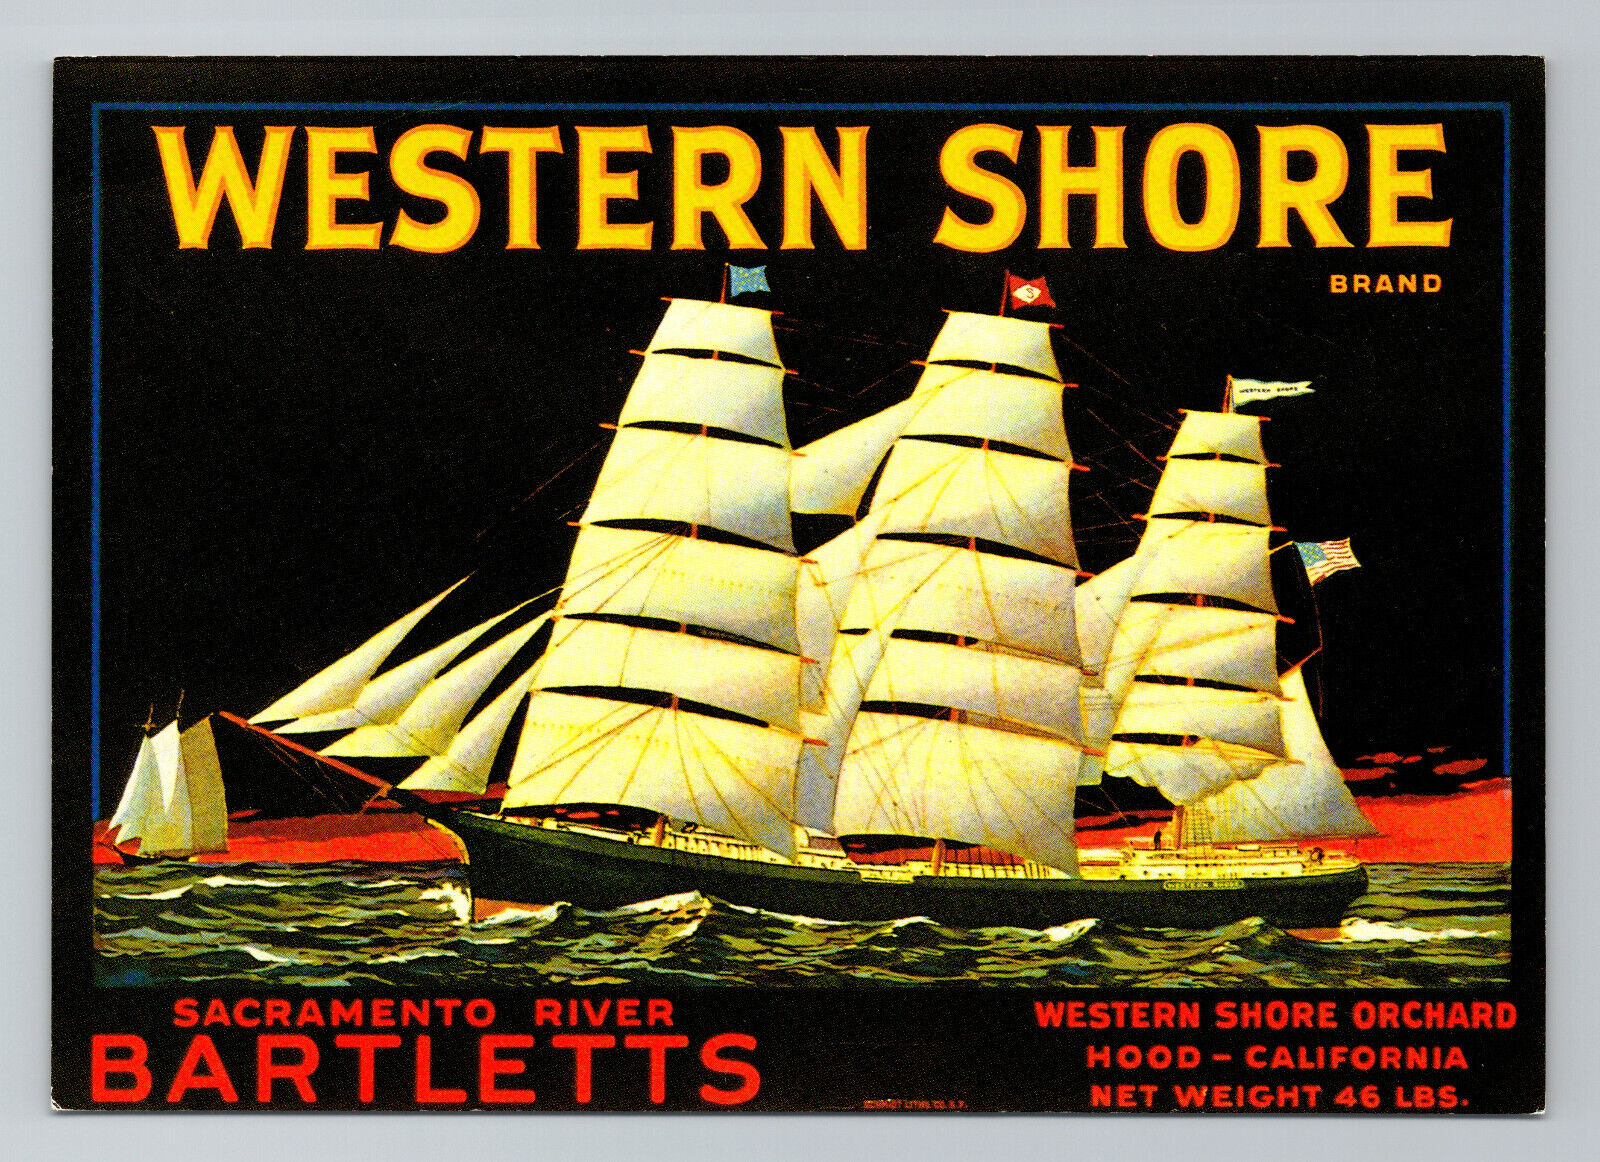 1980s Western Shore Brand Bartletts Pear Crate Label Postcard